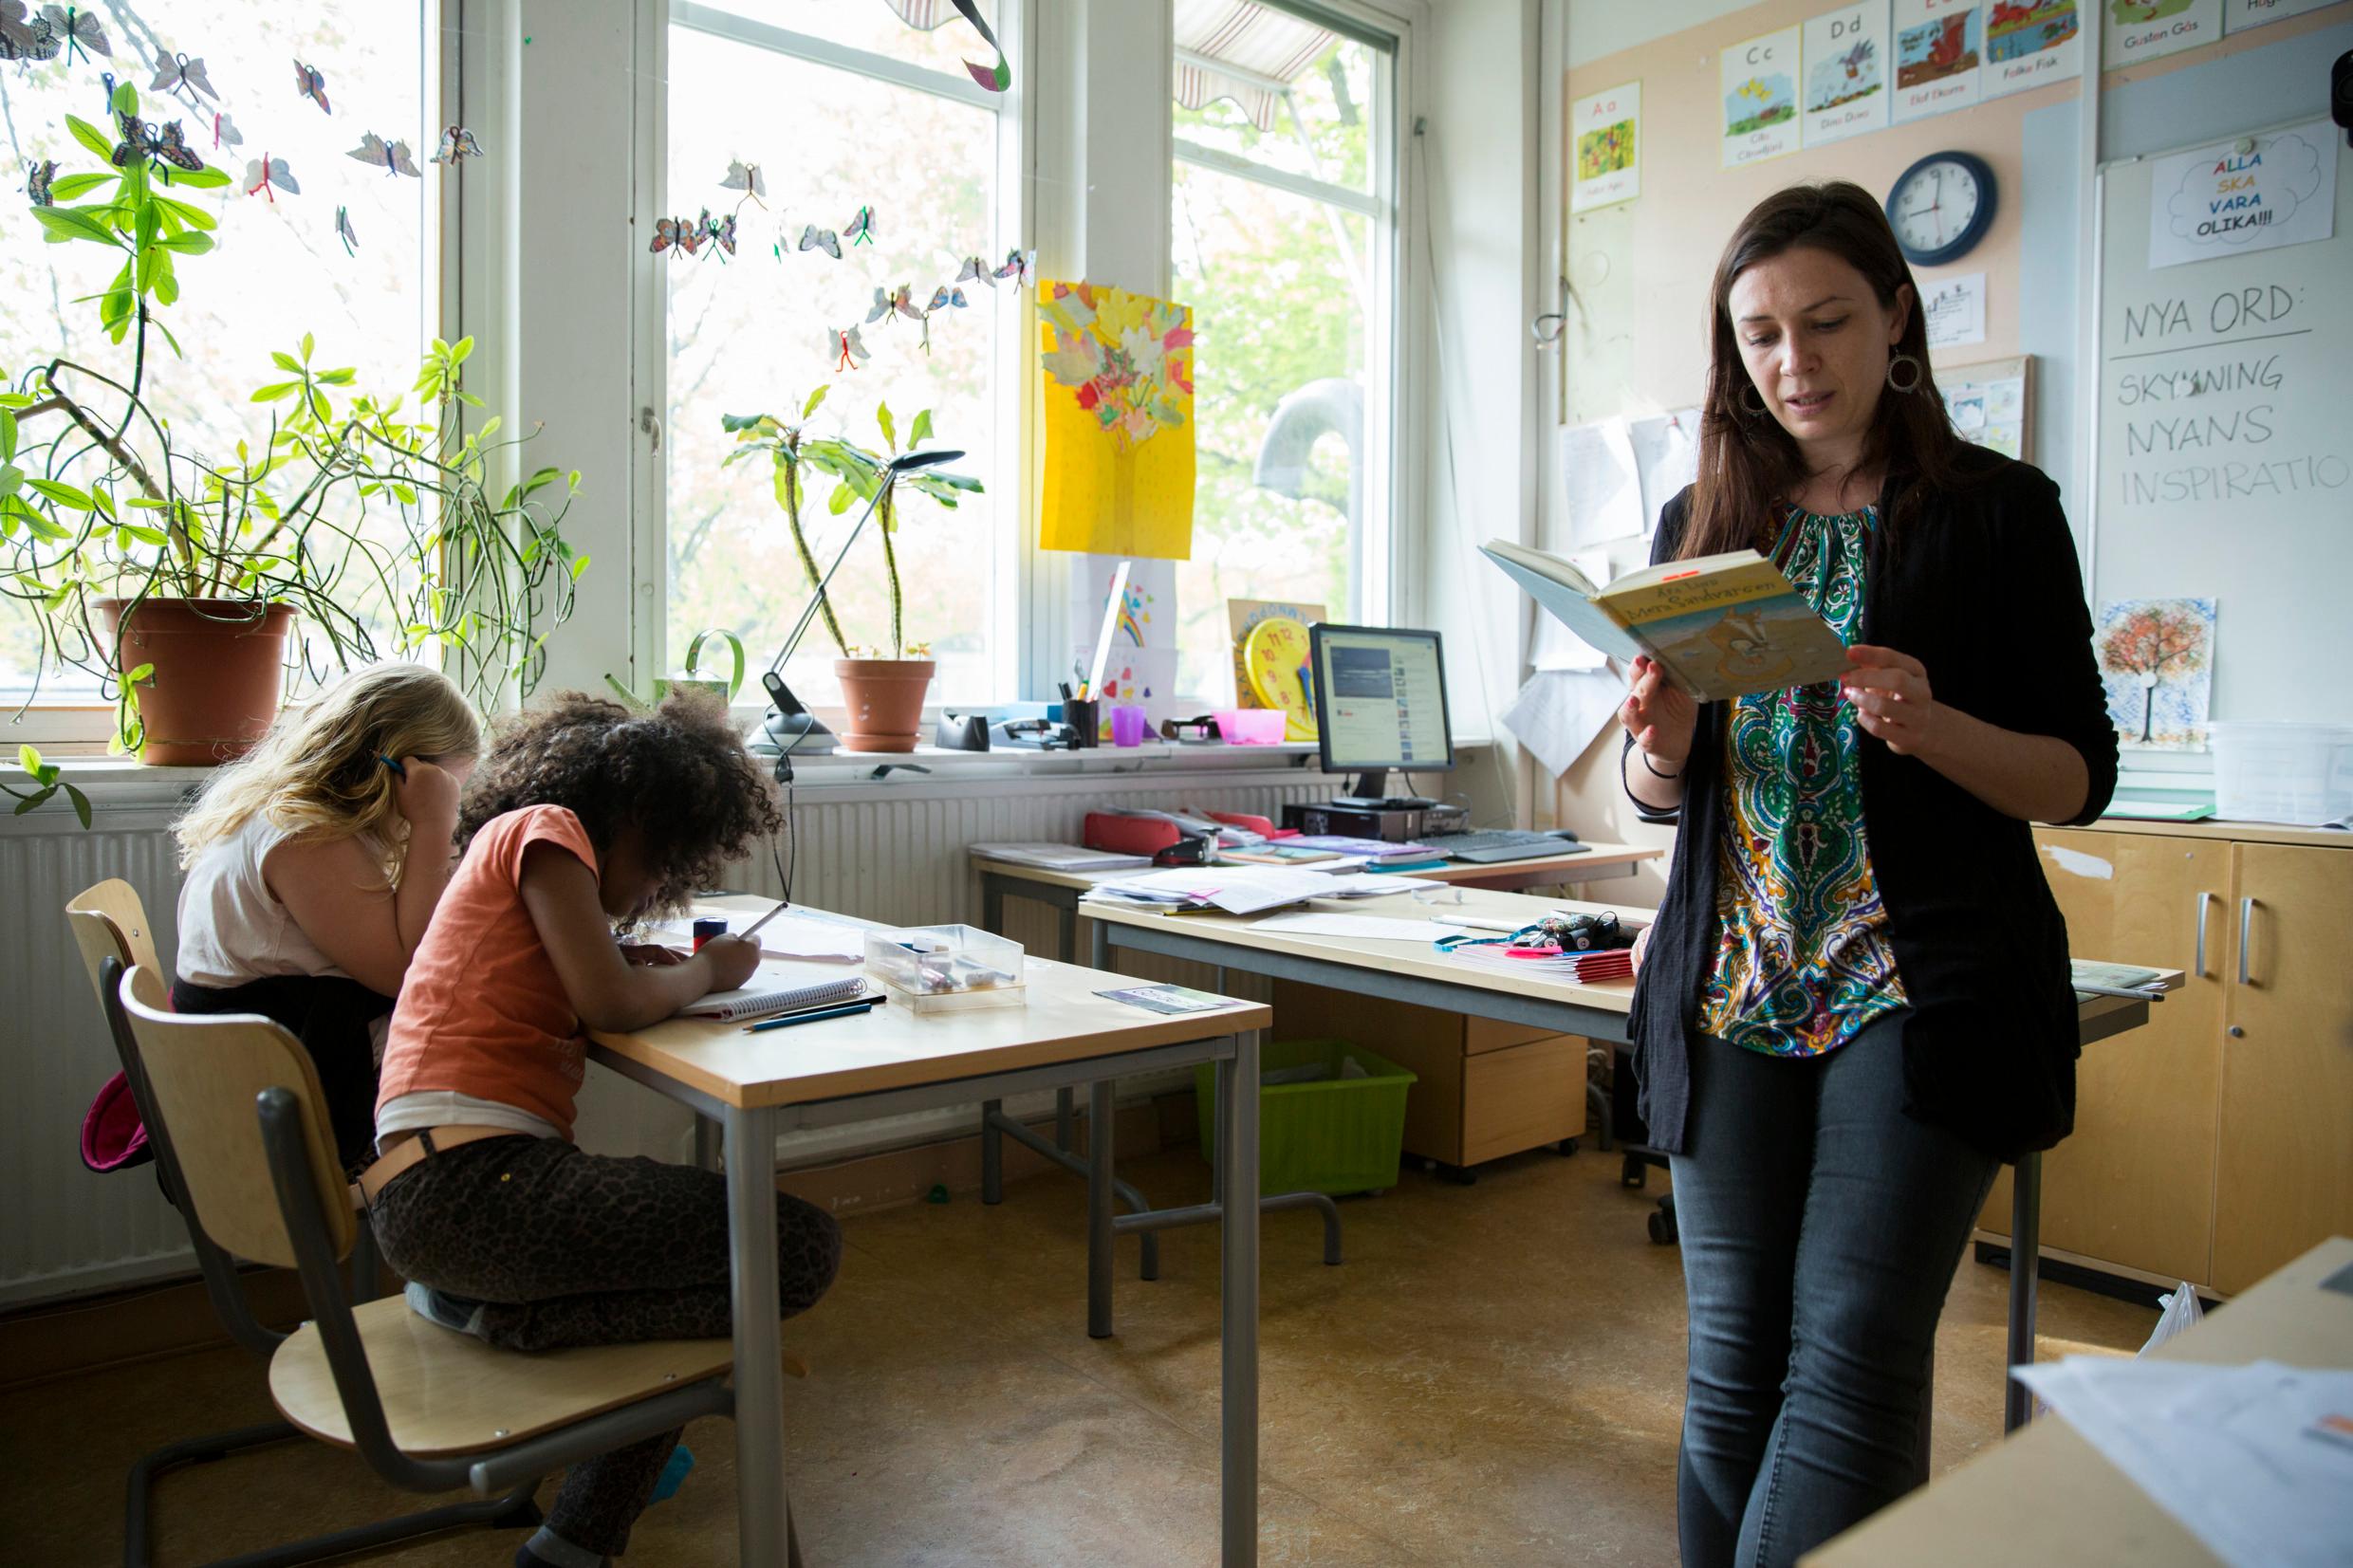 A classroom, with two children seen from the back leaning over their desks and a teacher standing up and reading from a book. A glimpse of the Swedish school system.